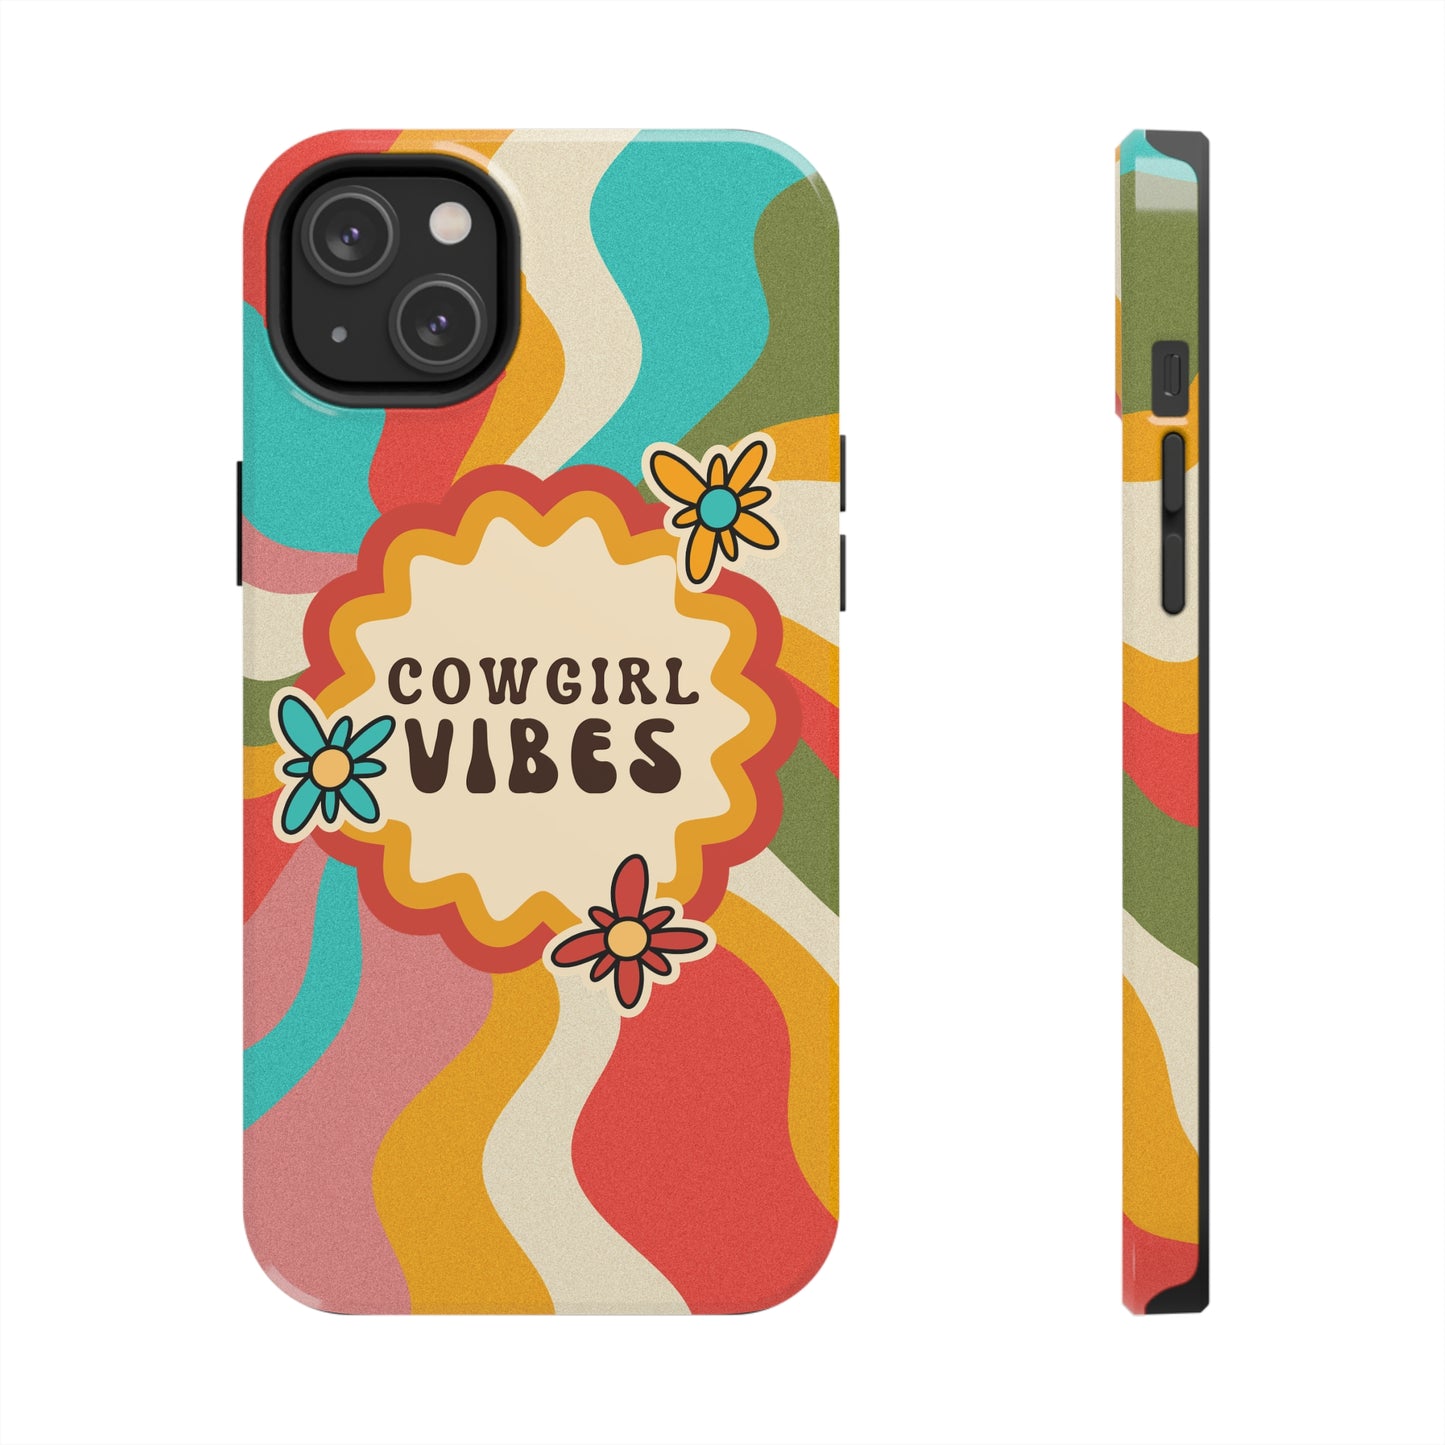 Cowgirl Vibes Protective Phone Case